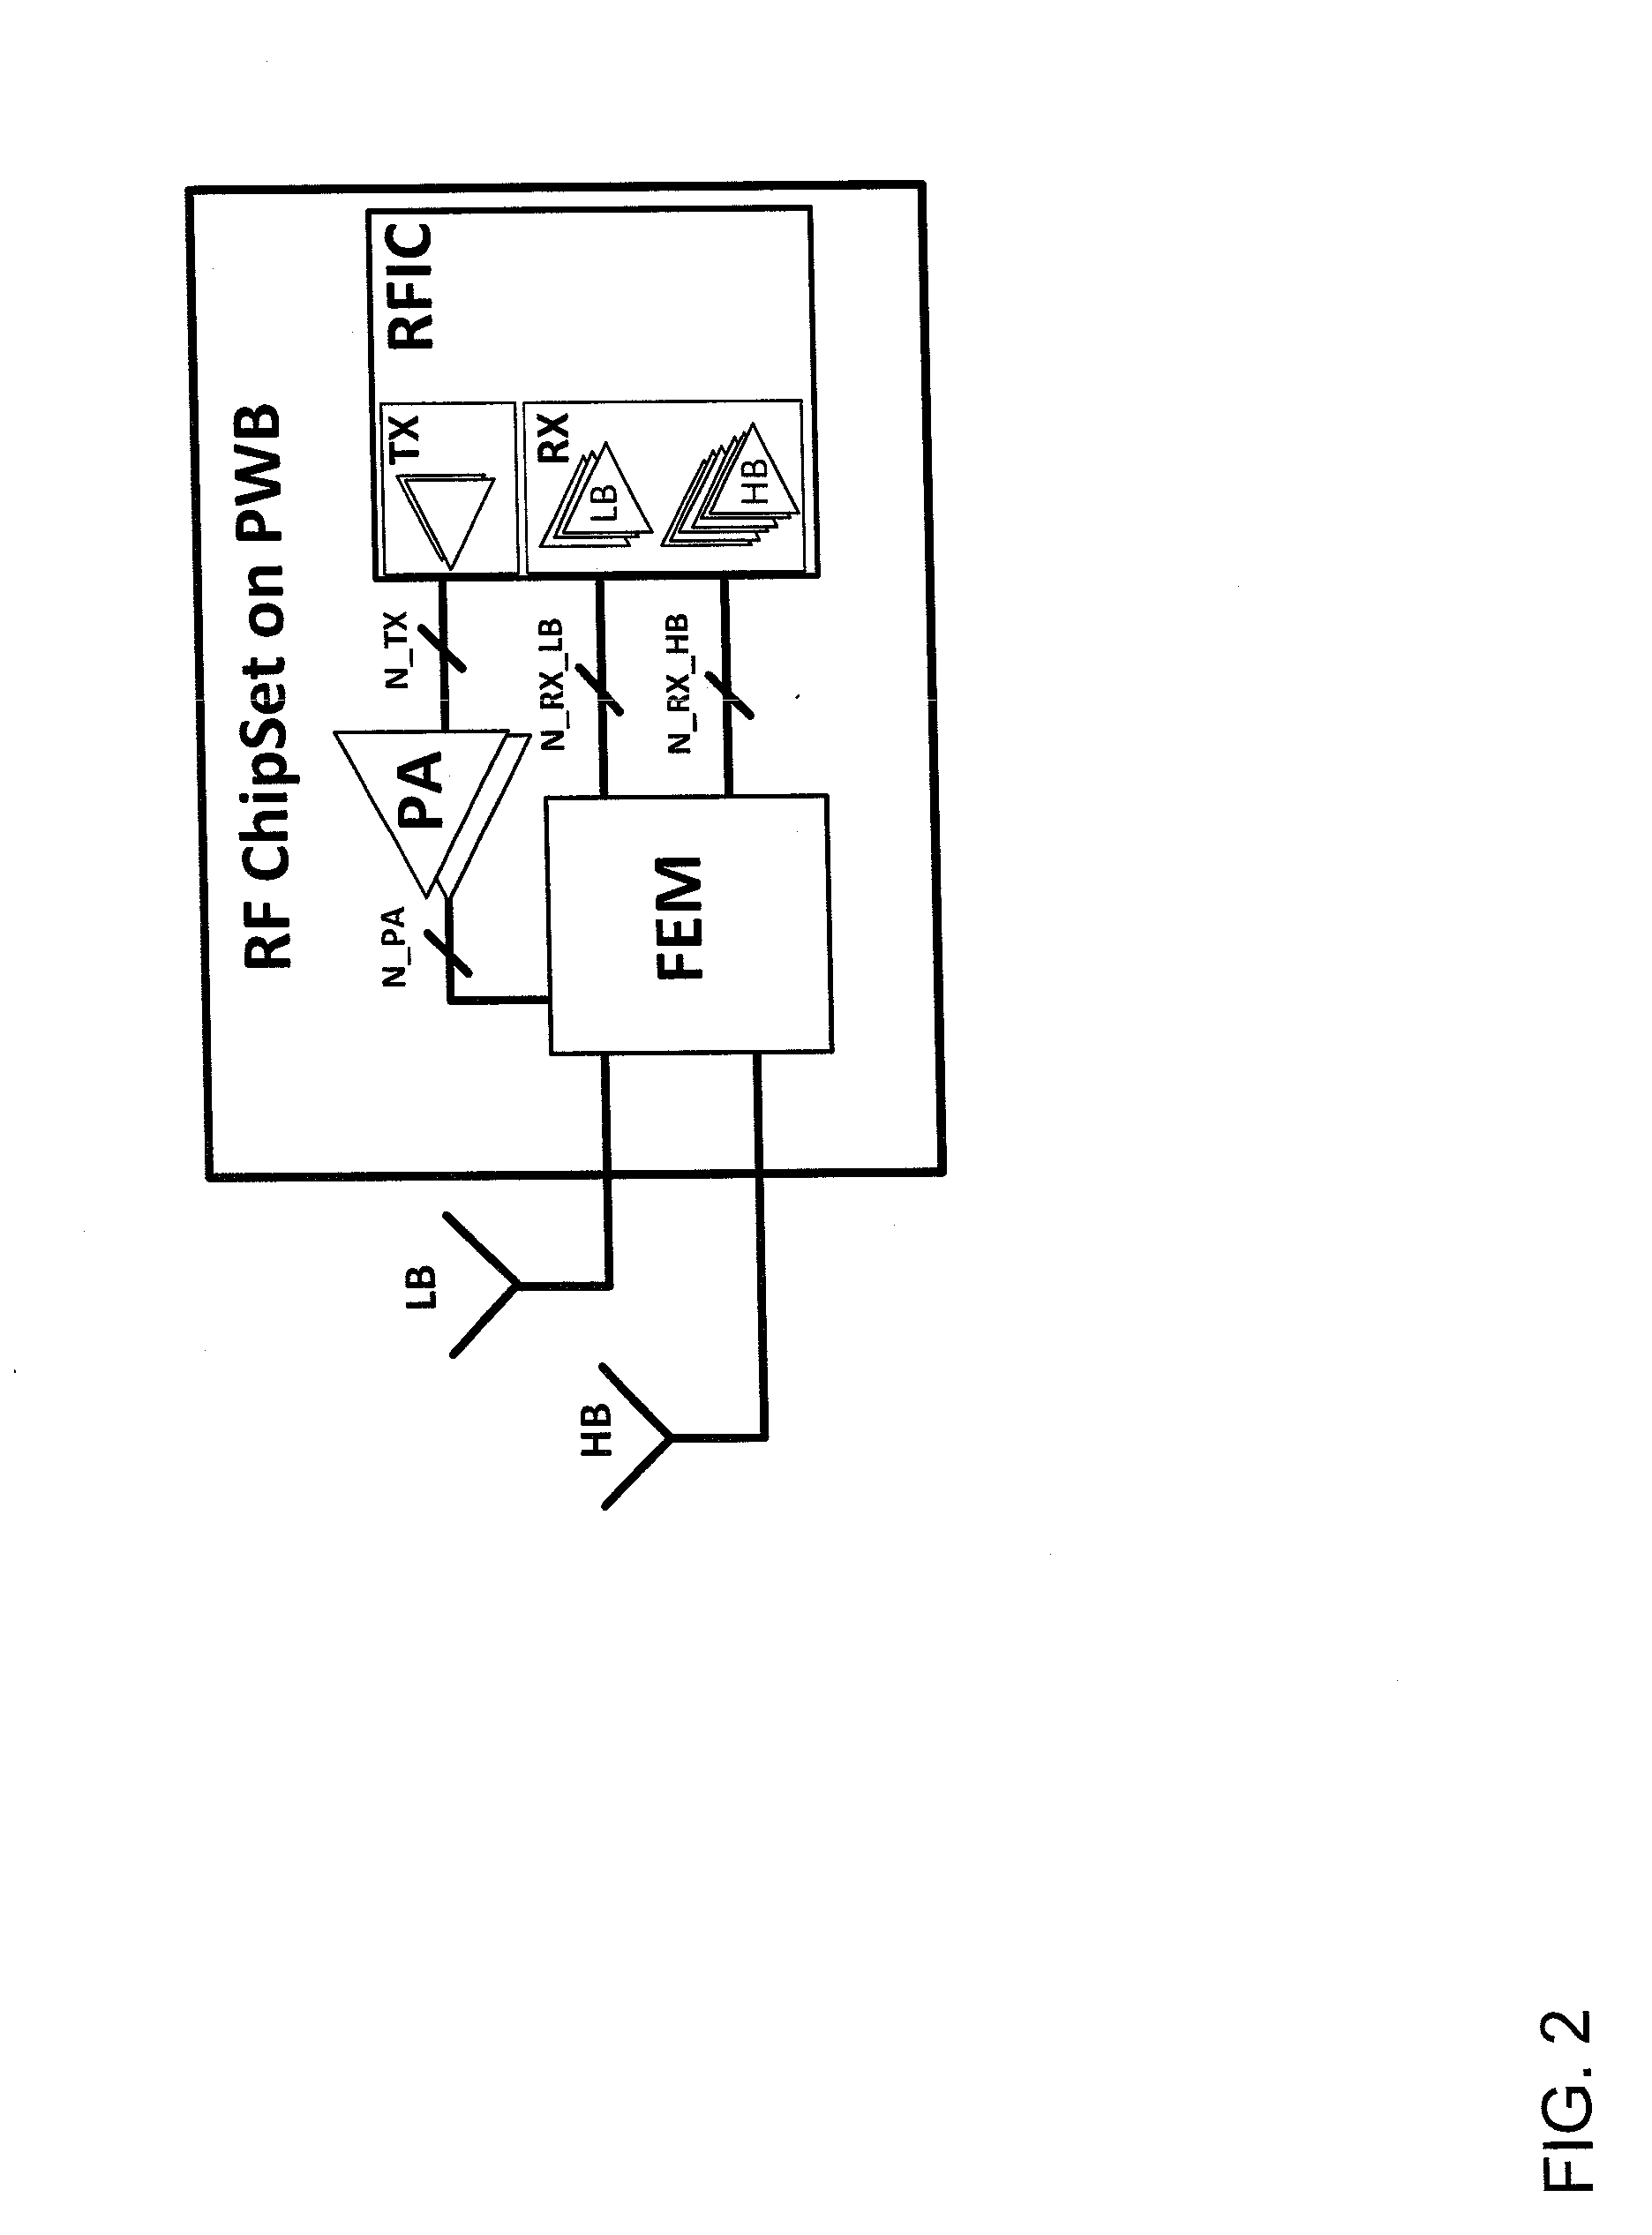 Radio Frequency Integrated Circuit